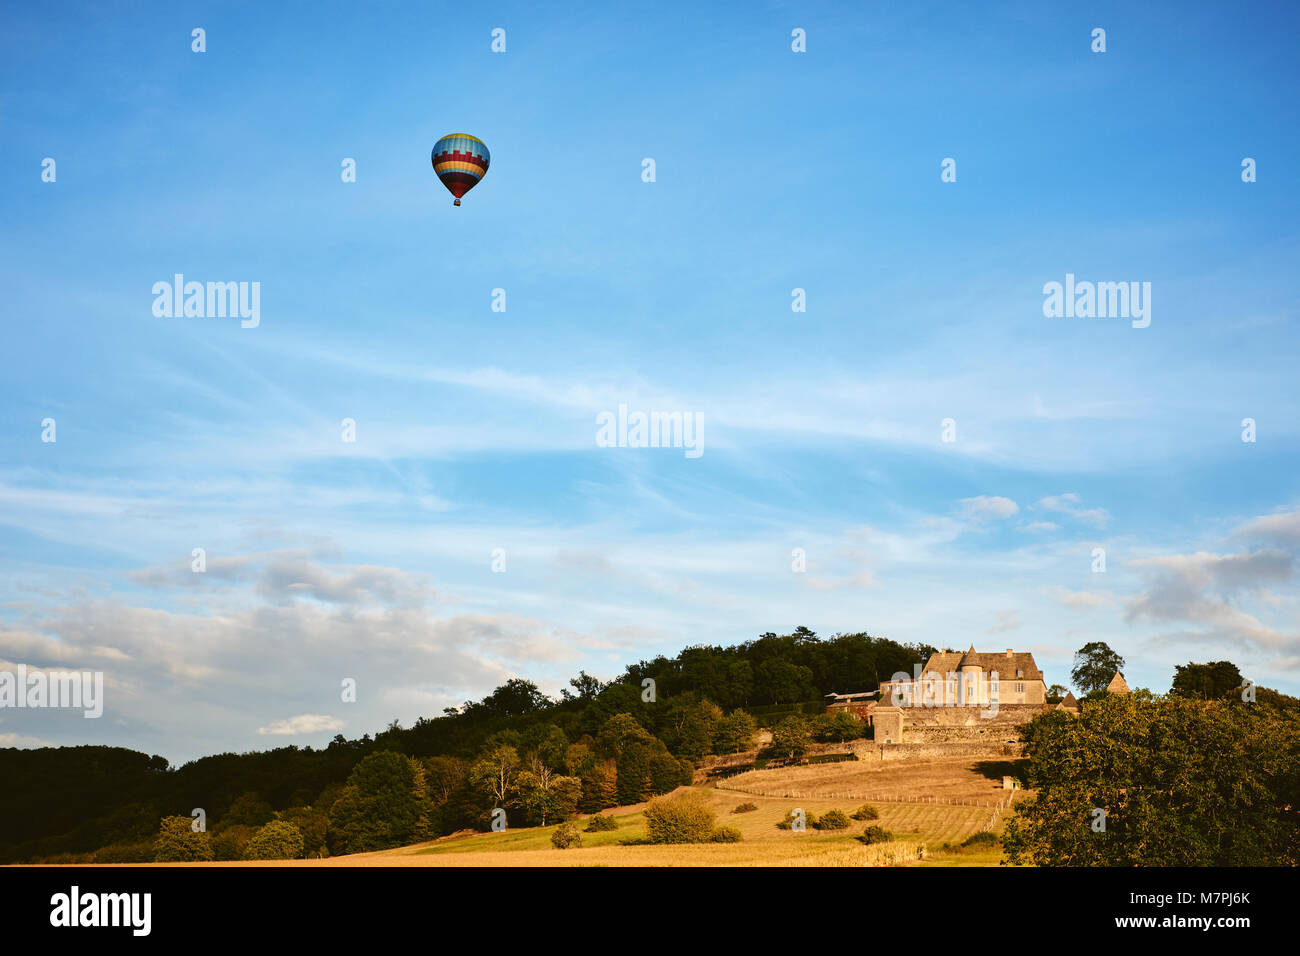 A hot air balloon glides over the Château de Marqueyssac a 17th-century château and gardens located at Vézac, in the Dordogne Department of France. Stock Photo